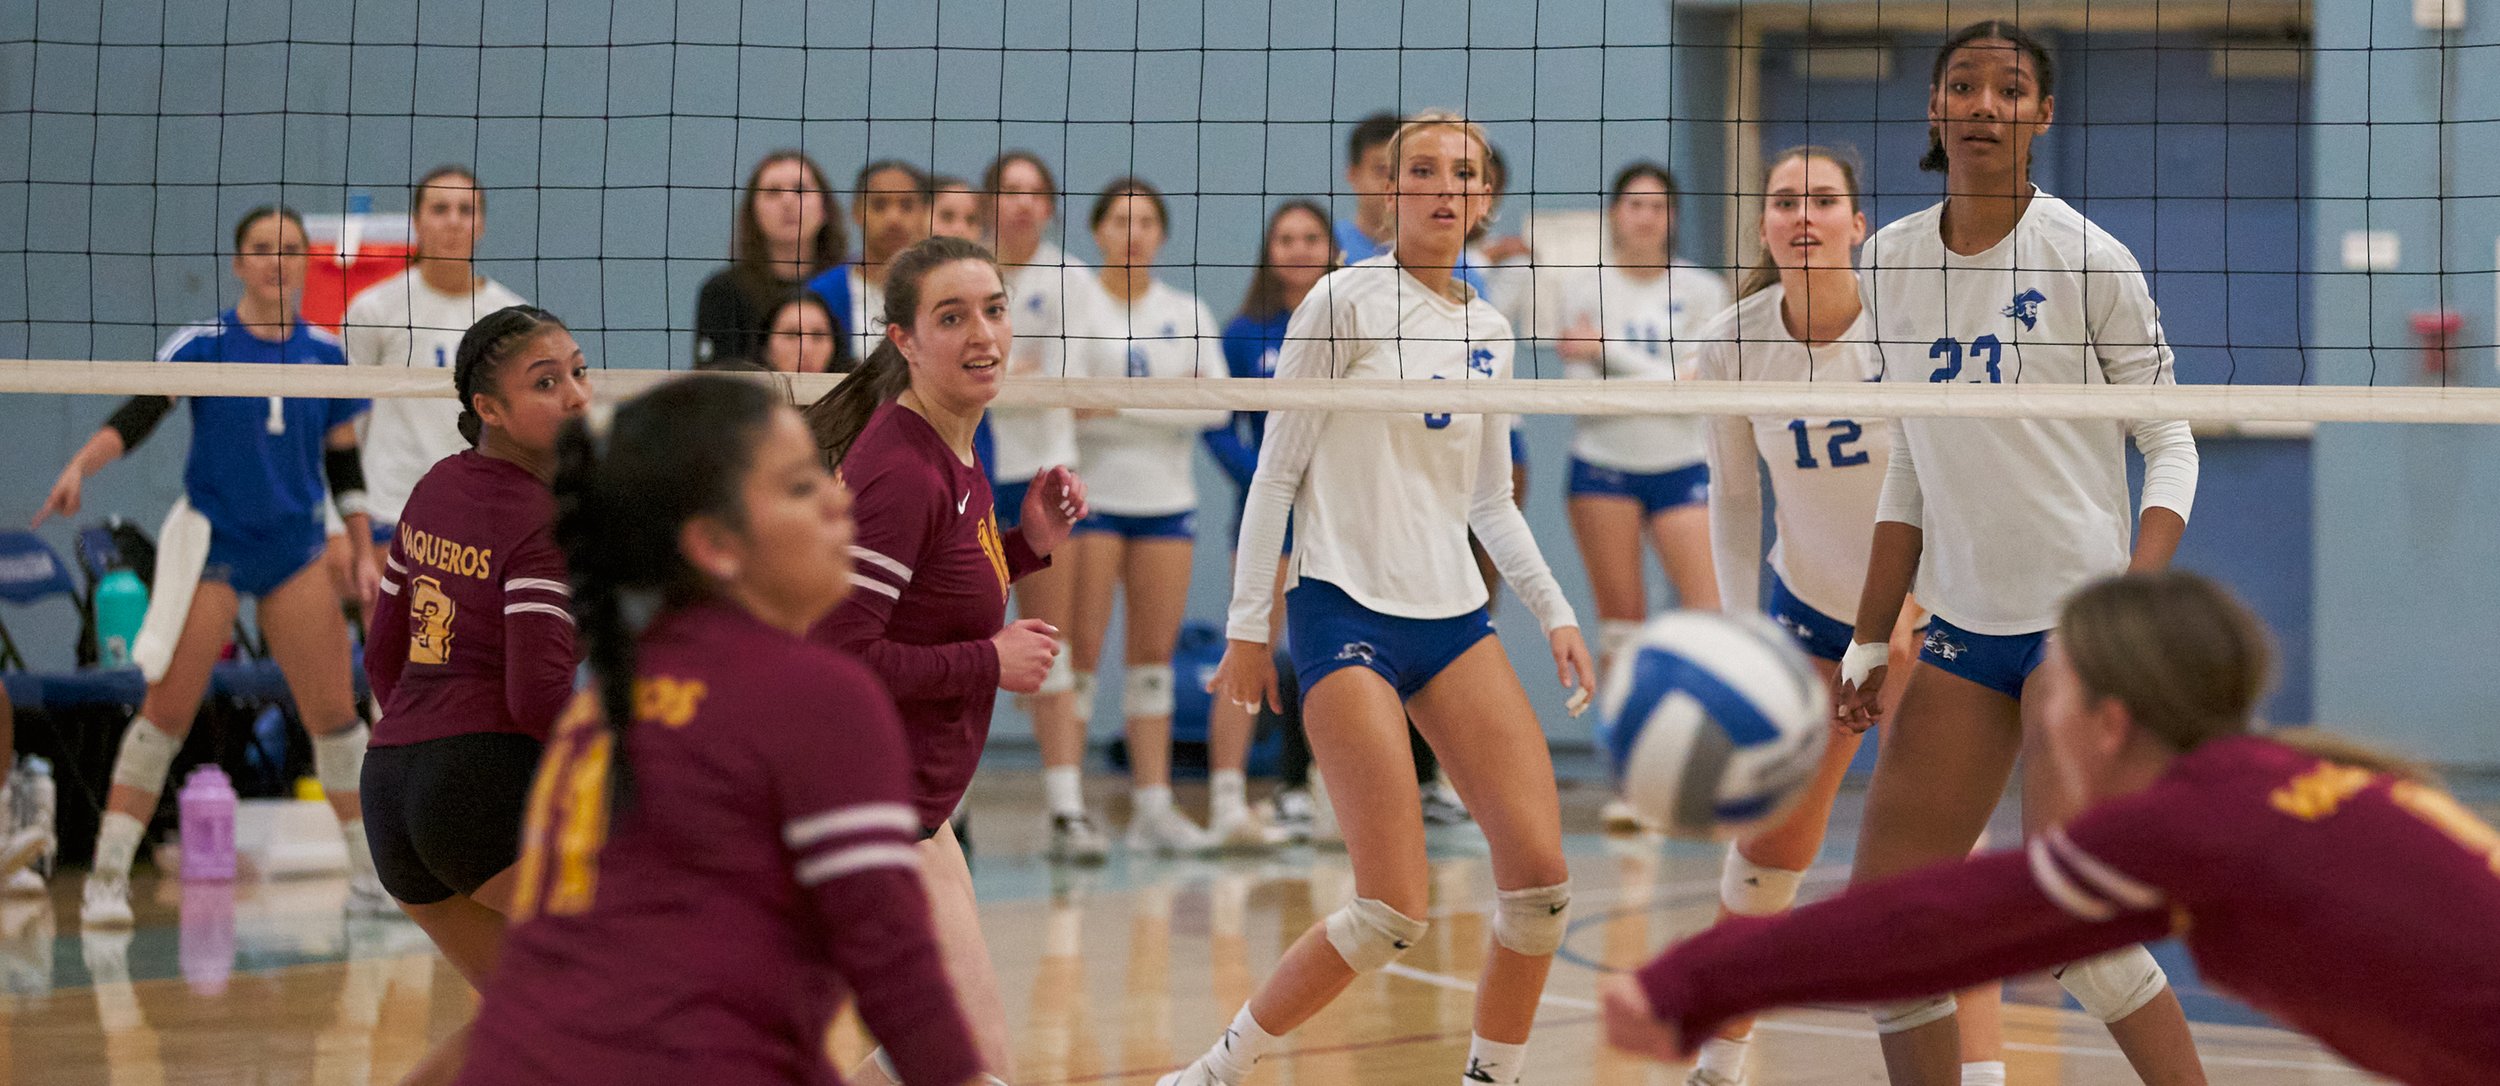  All eyes are focused on the ball during the women's volleyball match between the Santa Monica College Corsairs and the Glendale Community College Vaqueros on Wednesday, Nov. 9, 2022, at SMC Gym in Santa Monica, Calif. The Corsairs won 3-0. (Nicholas